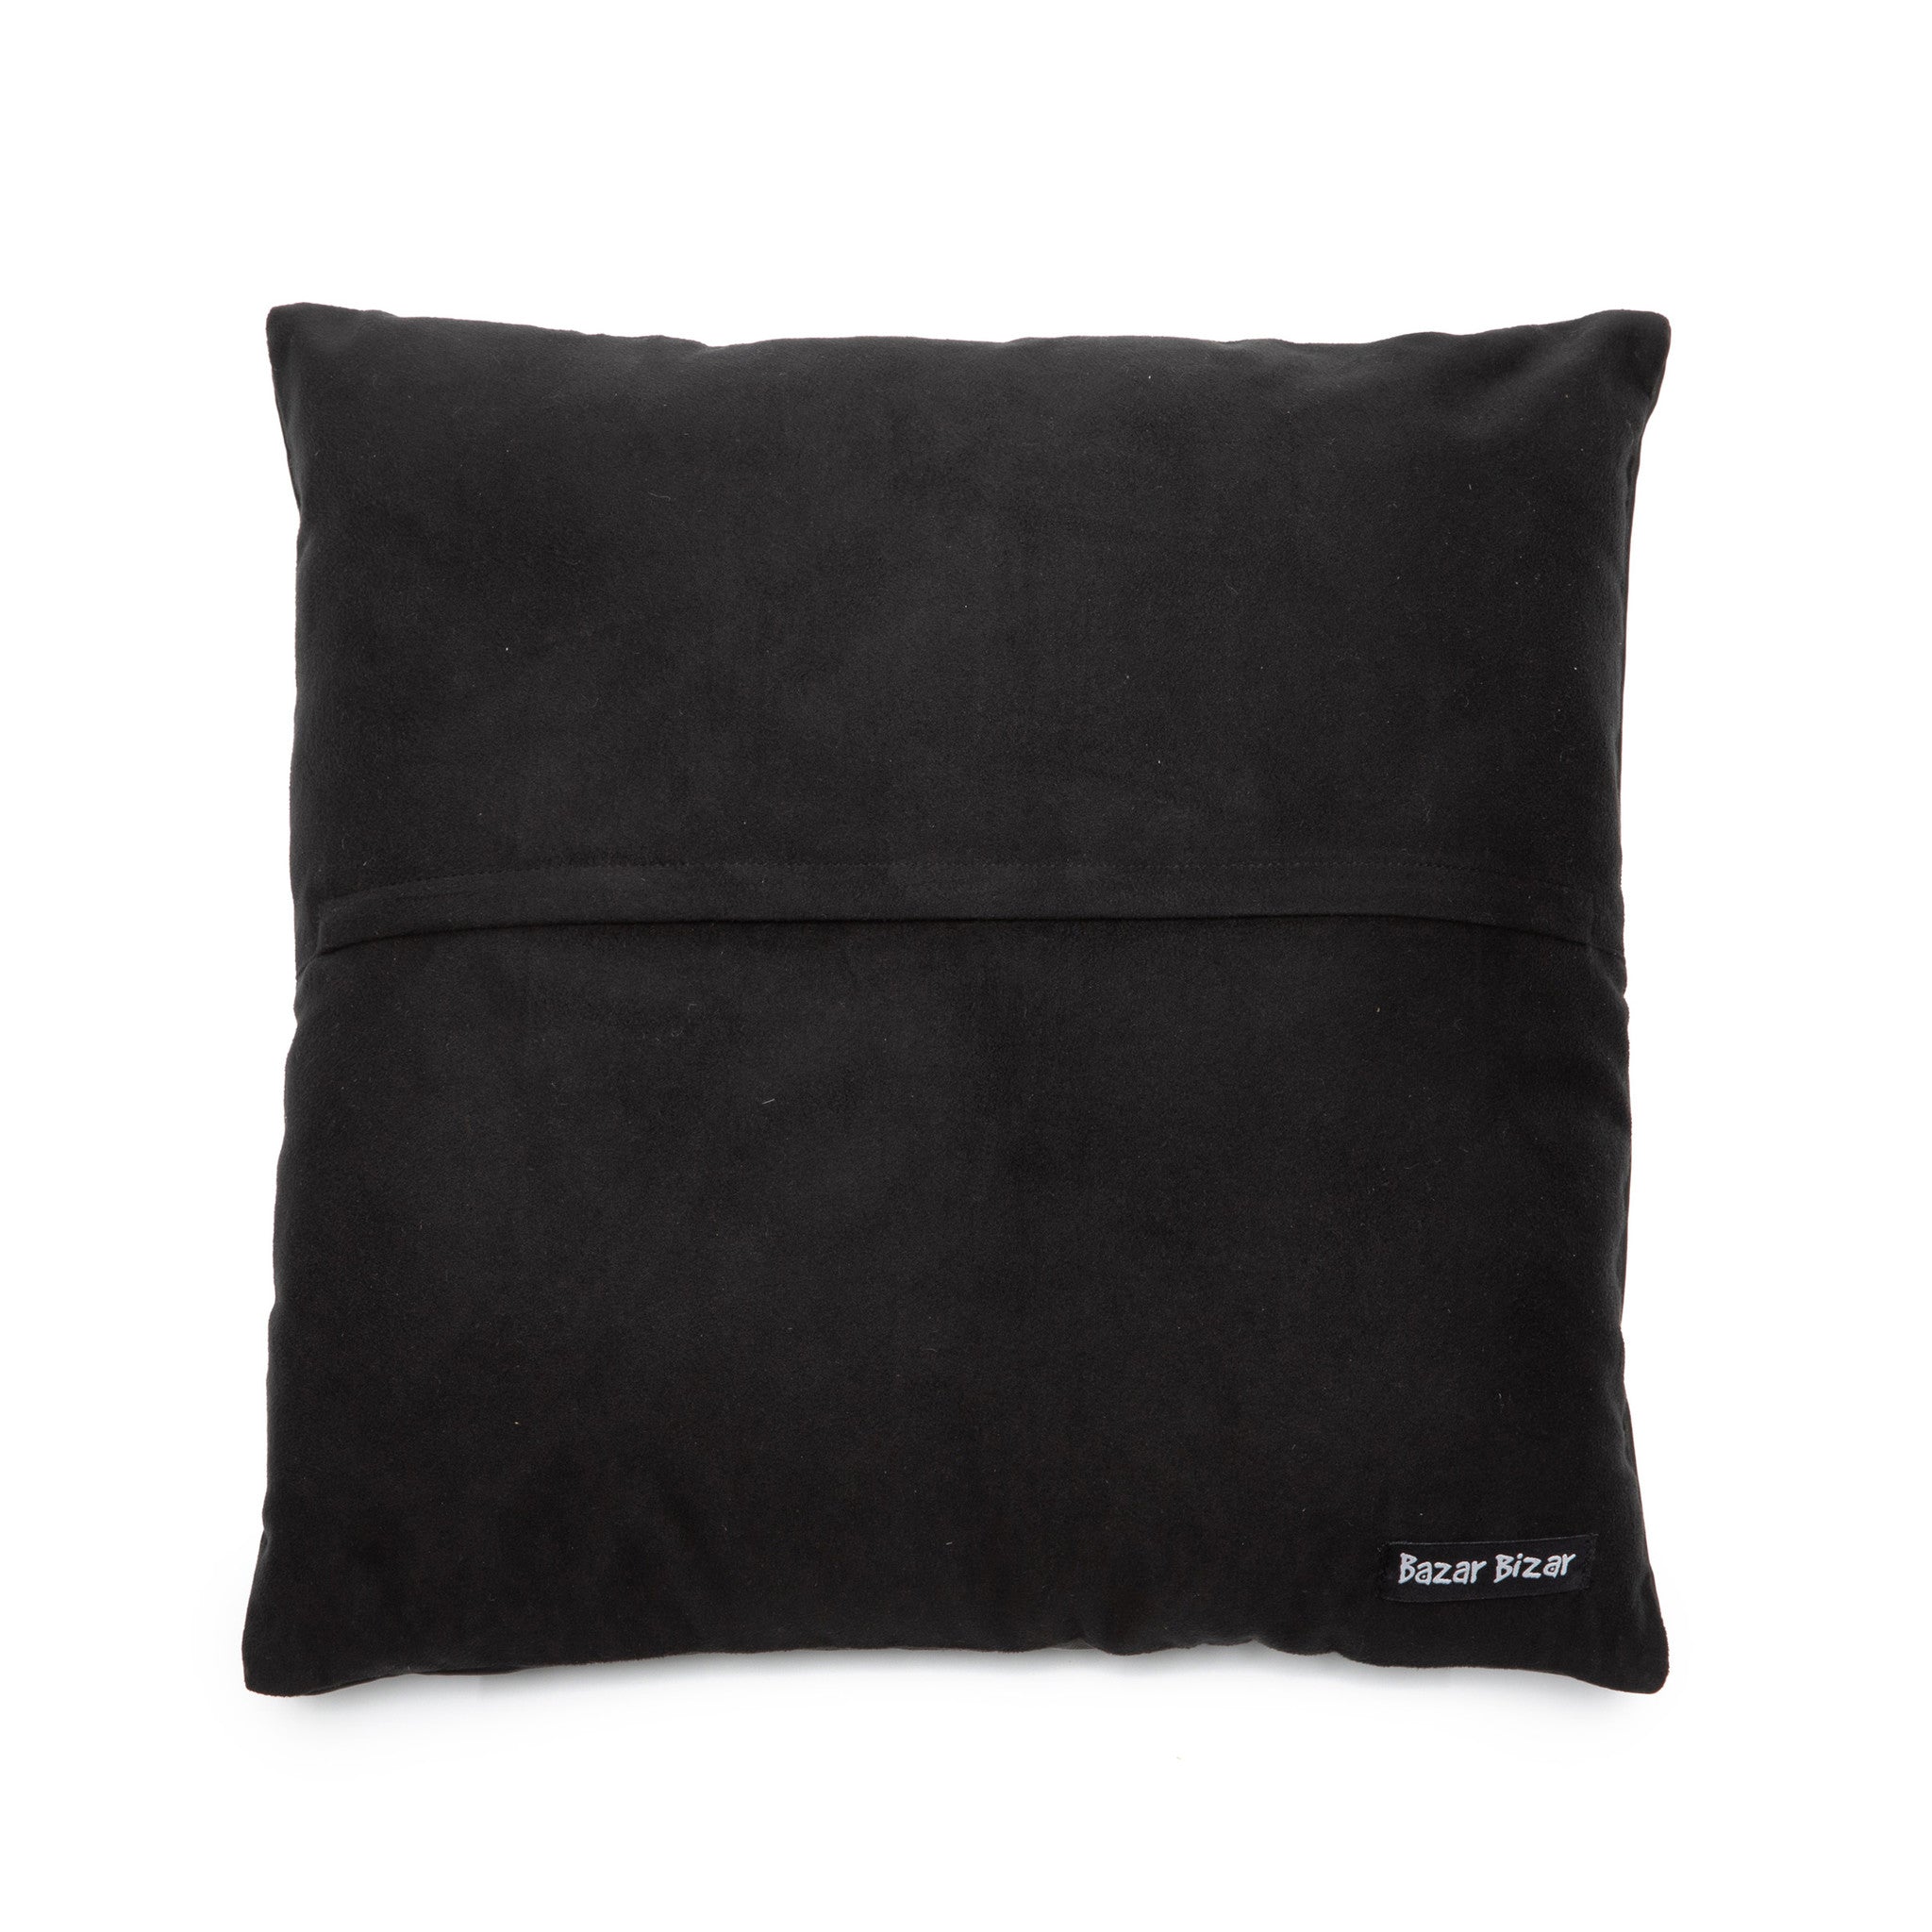 THE FOUR PANEL Leather Cushion Cover Black back side view